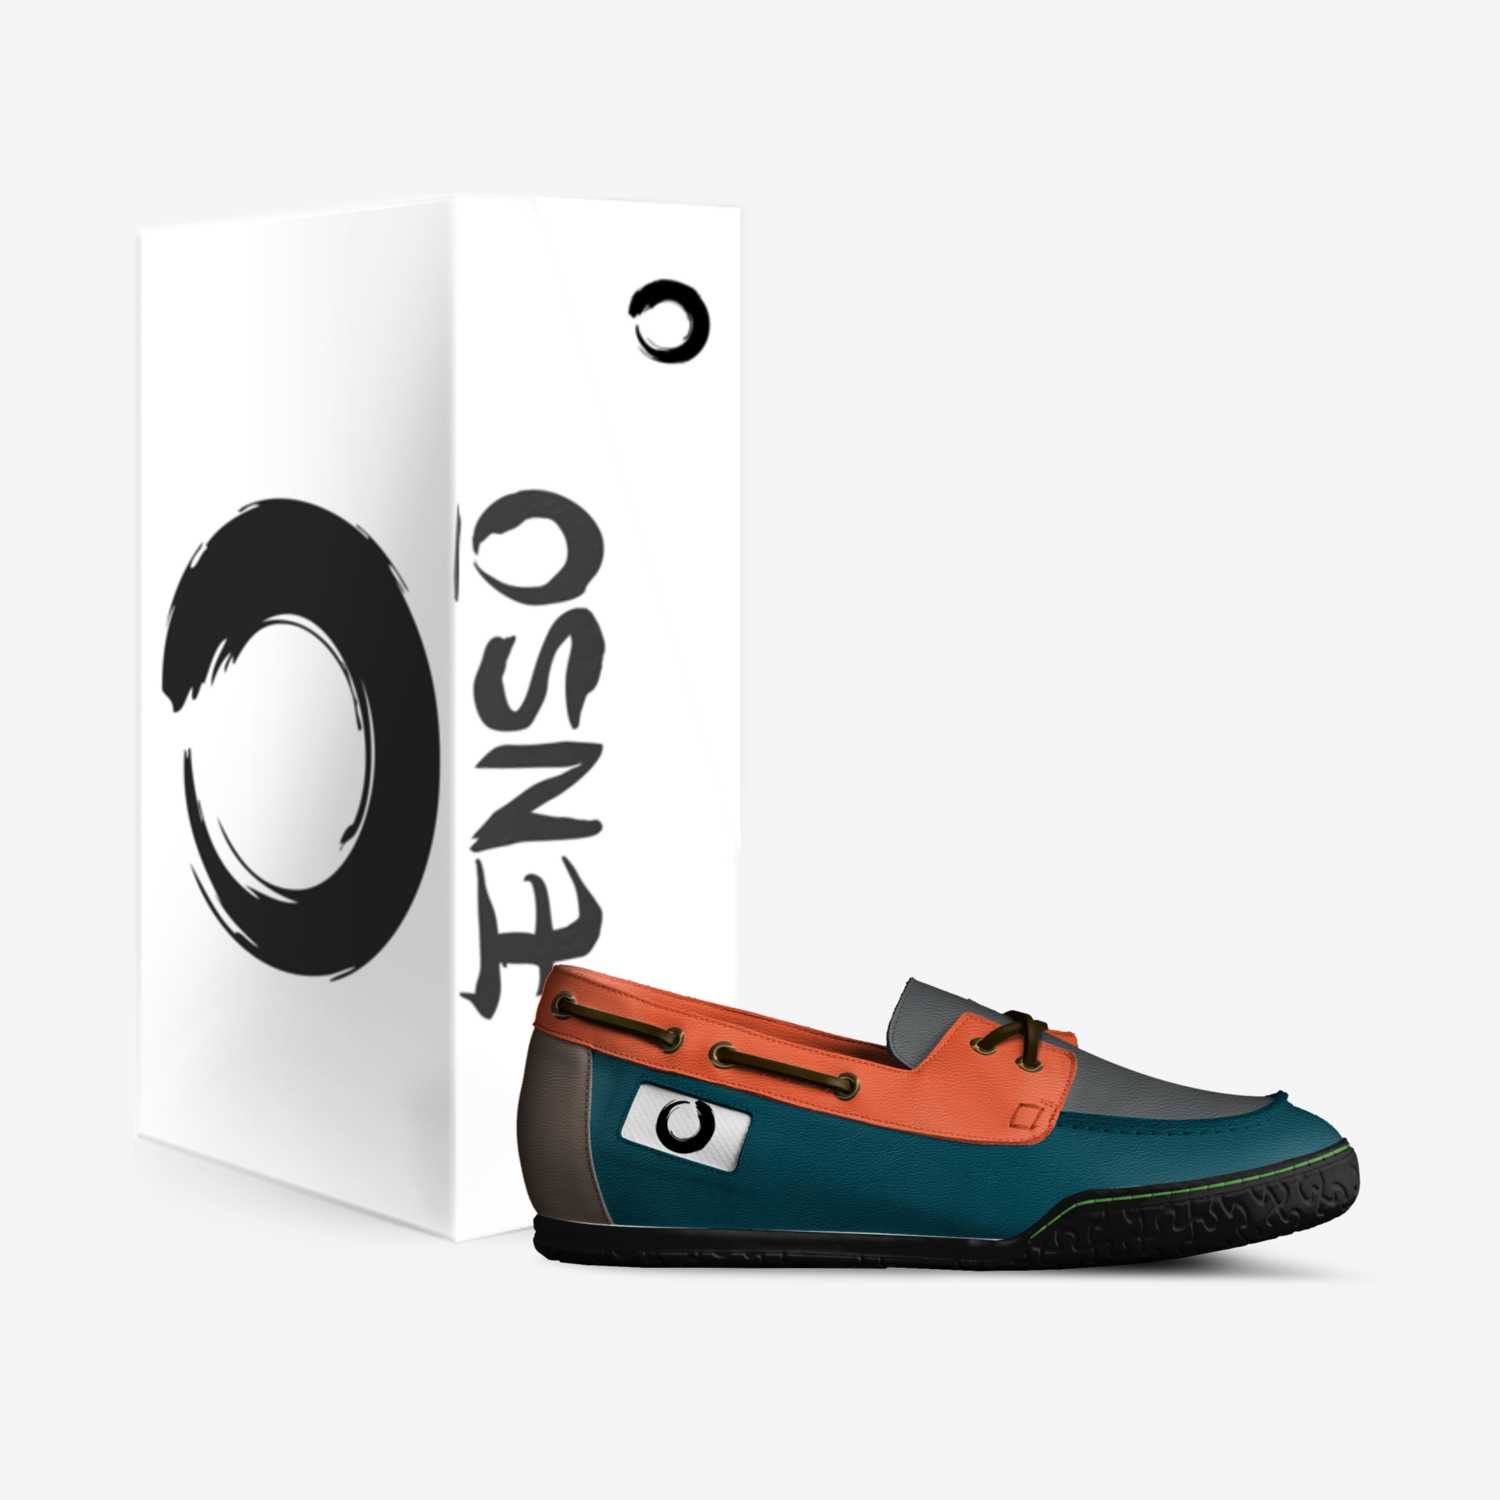 Multipurpose Shoe custom made in Italy shoes by Enso Llc | Box view